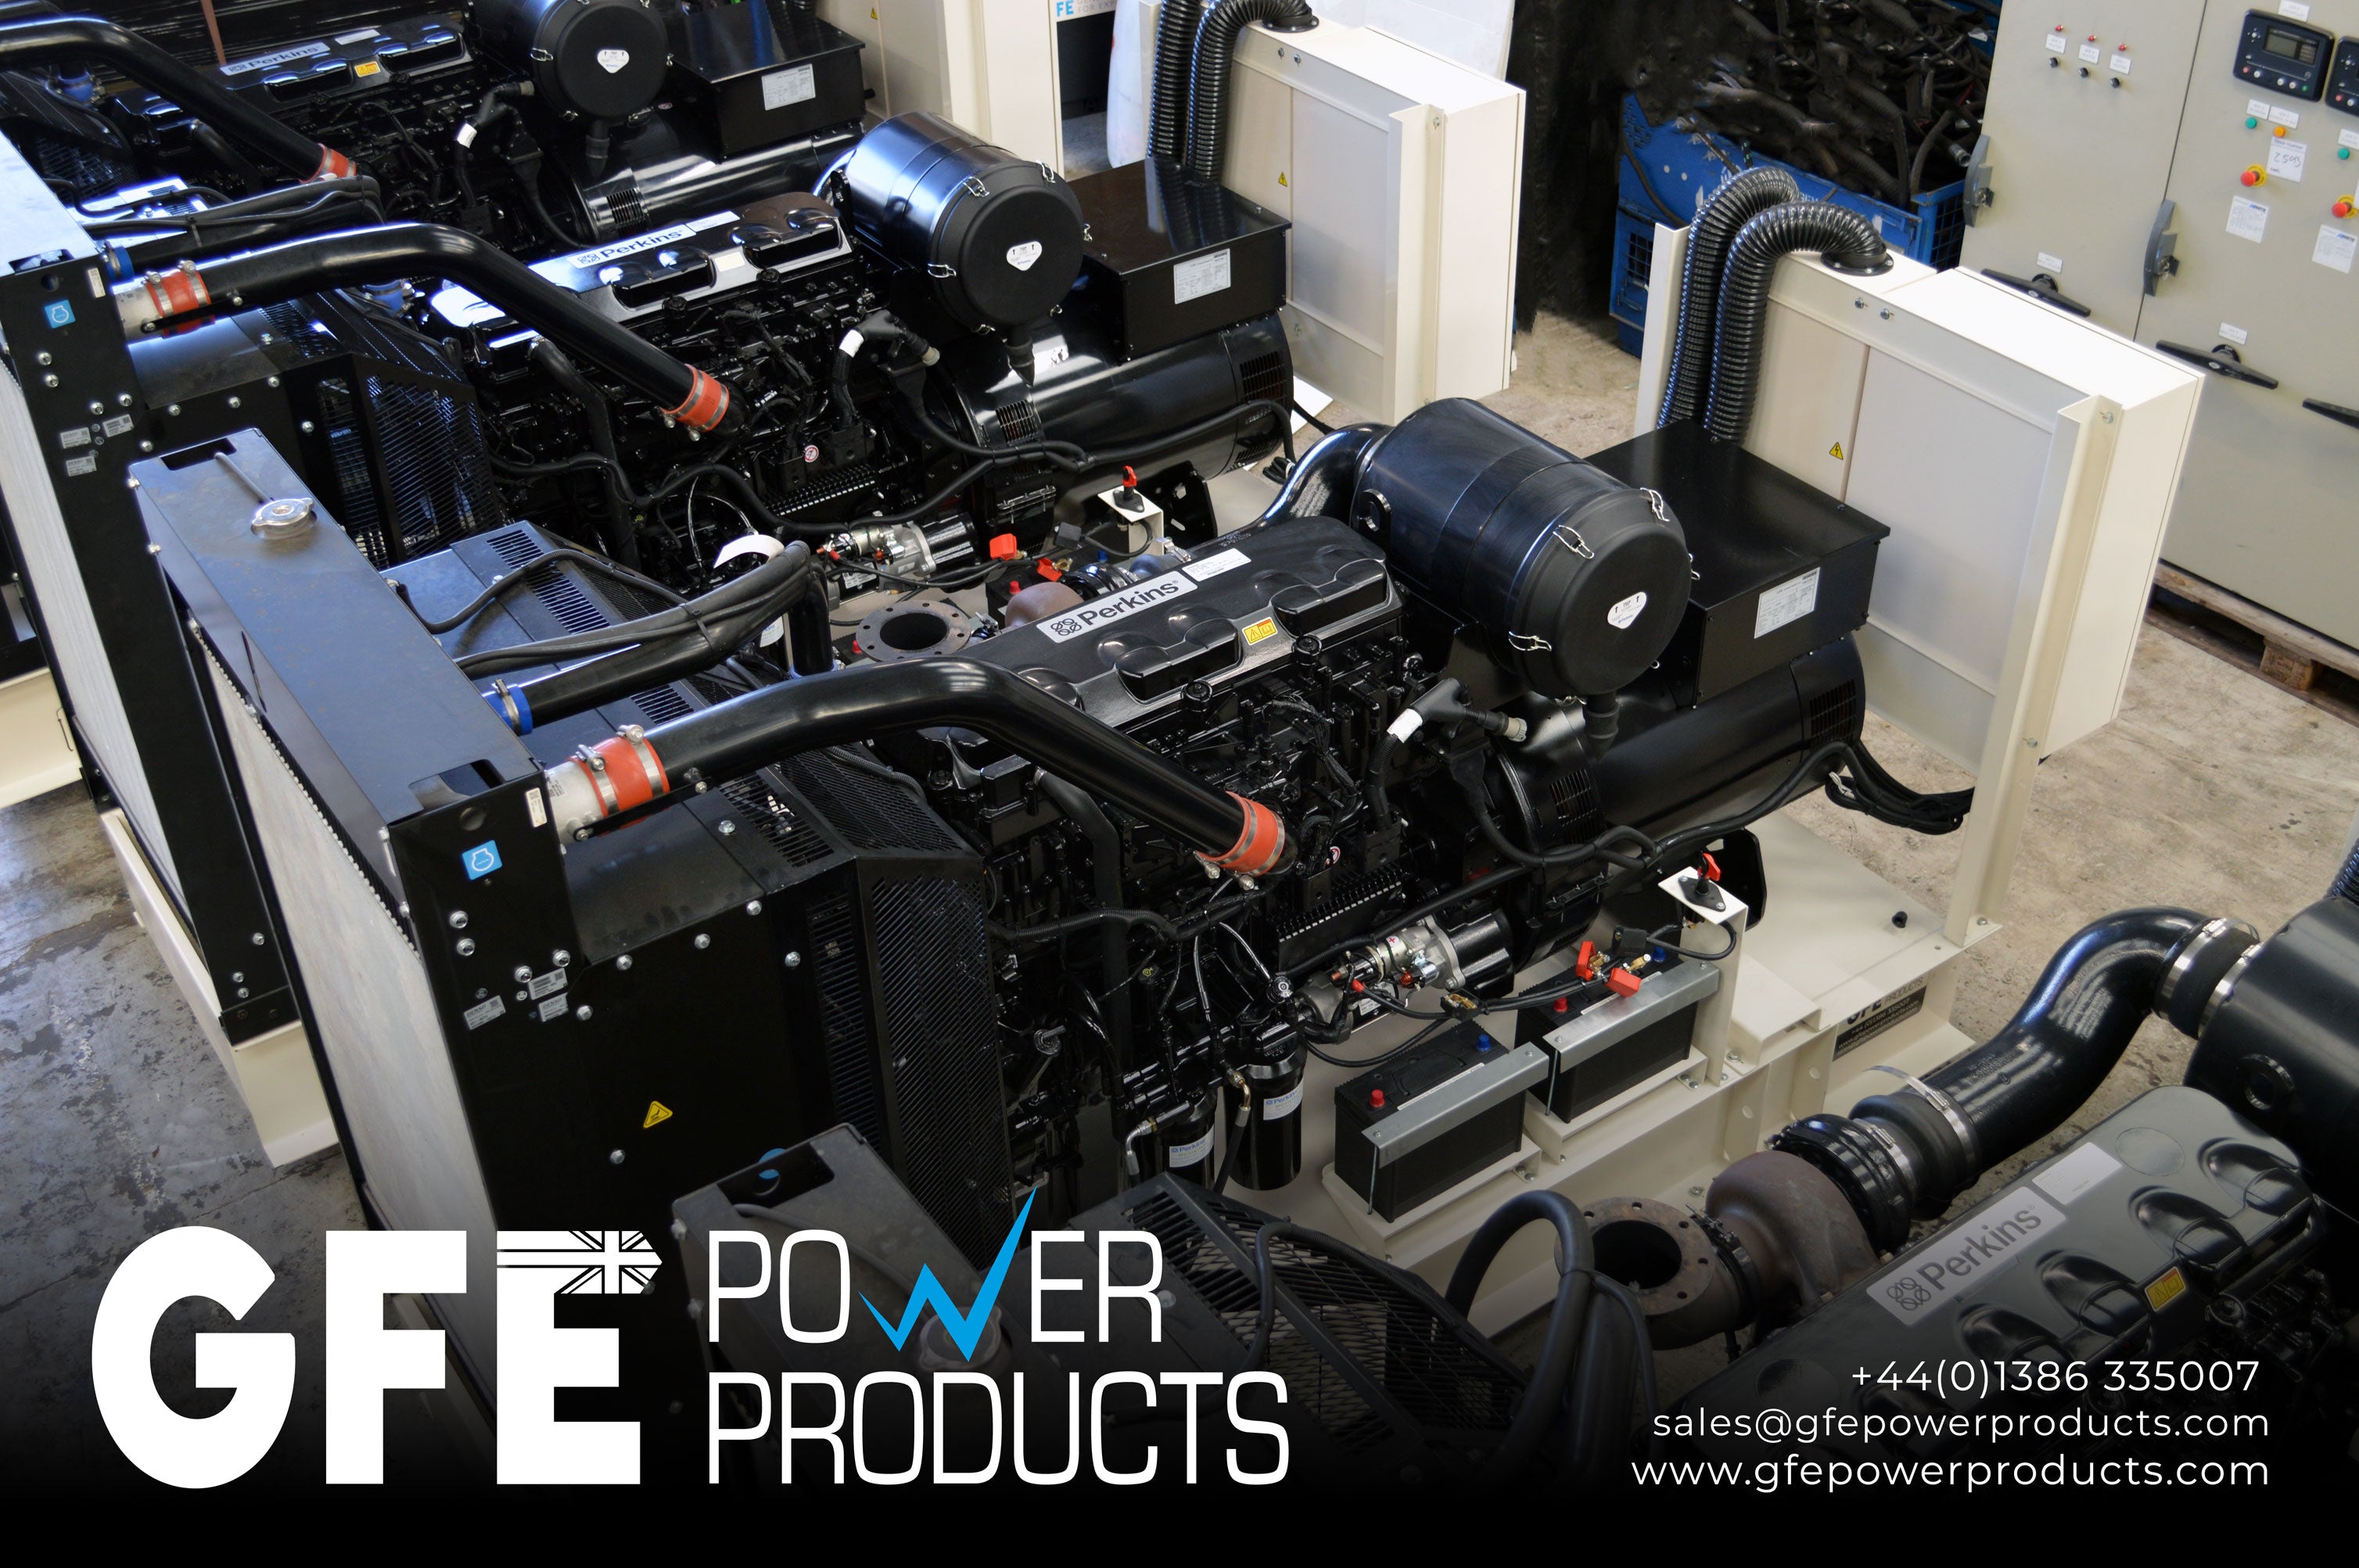 GFE Power Products Is An ISO Certified Leader In The Power Generation Industry